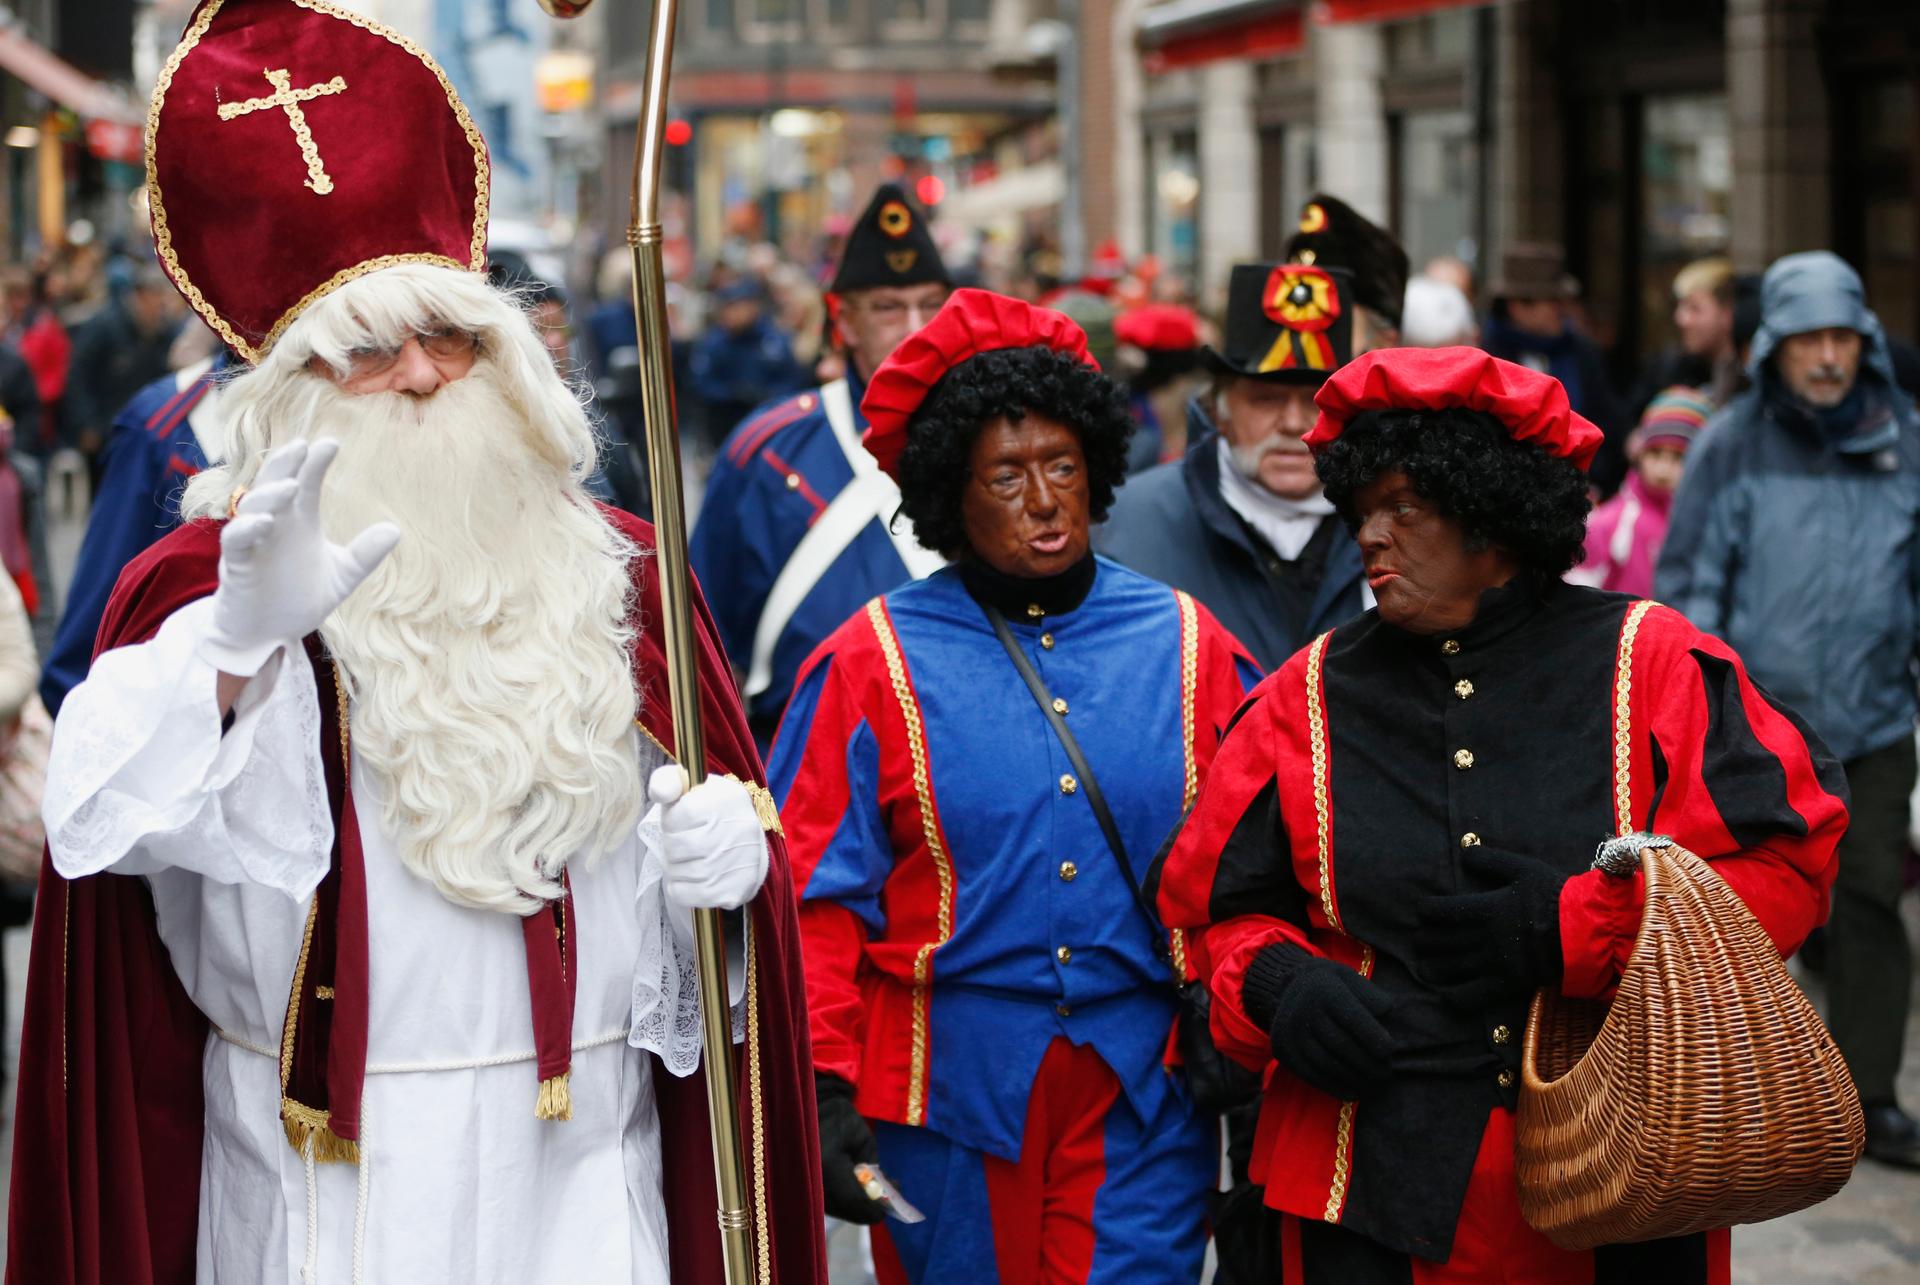 Saint Nicholas is followed by his two assistants called "Zwarte Piet" (Black Pete) during a traditional holiday parade.